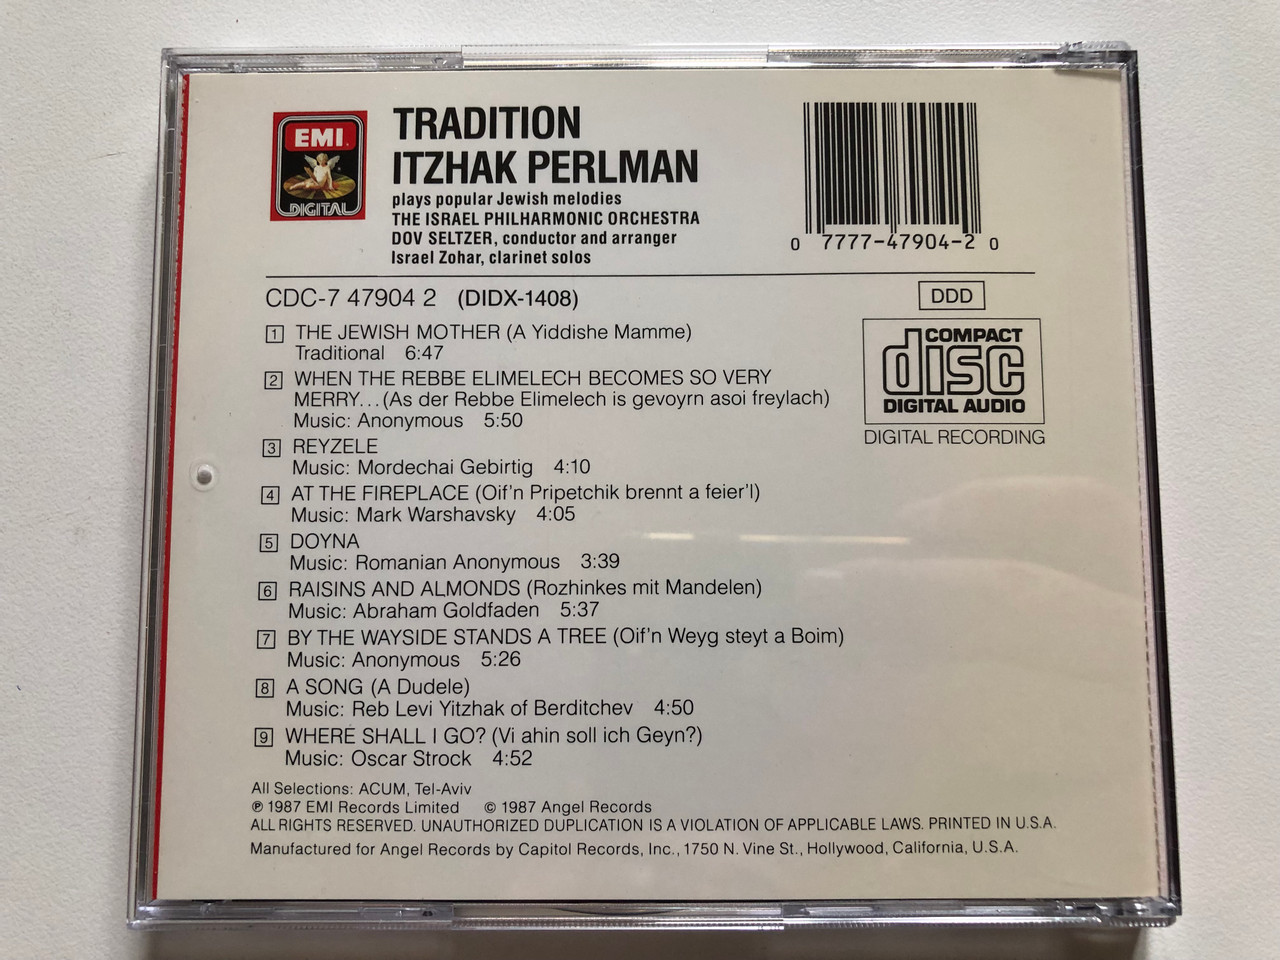 https://cdn10.bigcommerce.com/s-62bdpkt7pb/products/0/images/306132/Tradition_-_Itzhak_Perlman_Plays_Popular_Jewish_Melodies_-_The_Israel_Philharmonic_Orchestra_Dov_Seltzer_conductor_and_arranger_EMI_Digital_Audio_CD_1987_CDC-7_47904_2_2__56928.1698158532.1280.1280.JPG?c=2